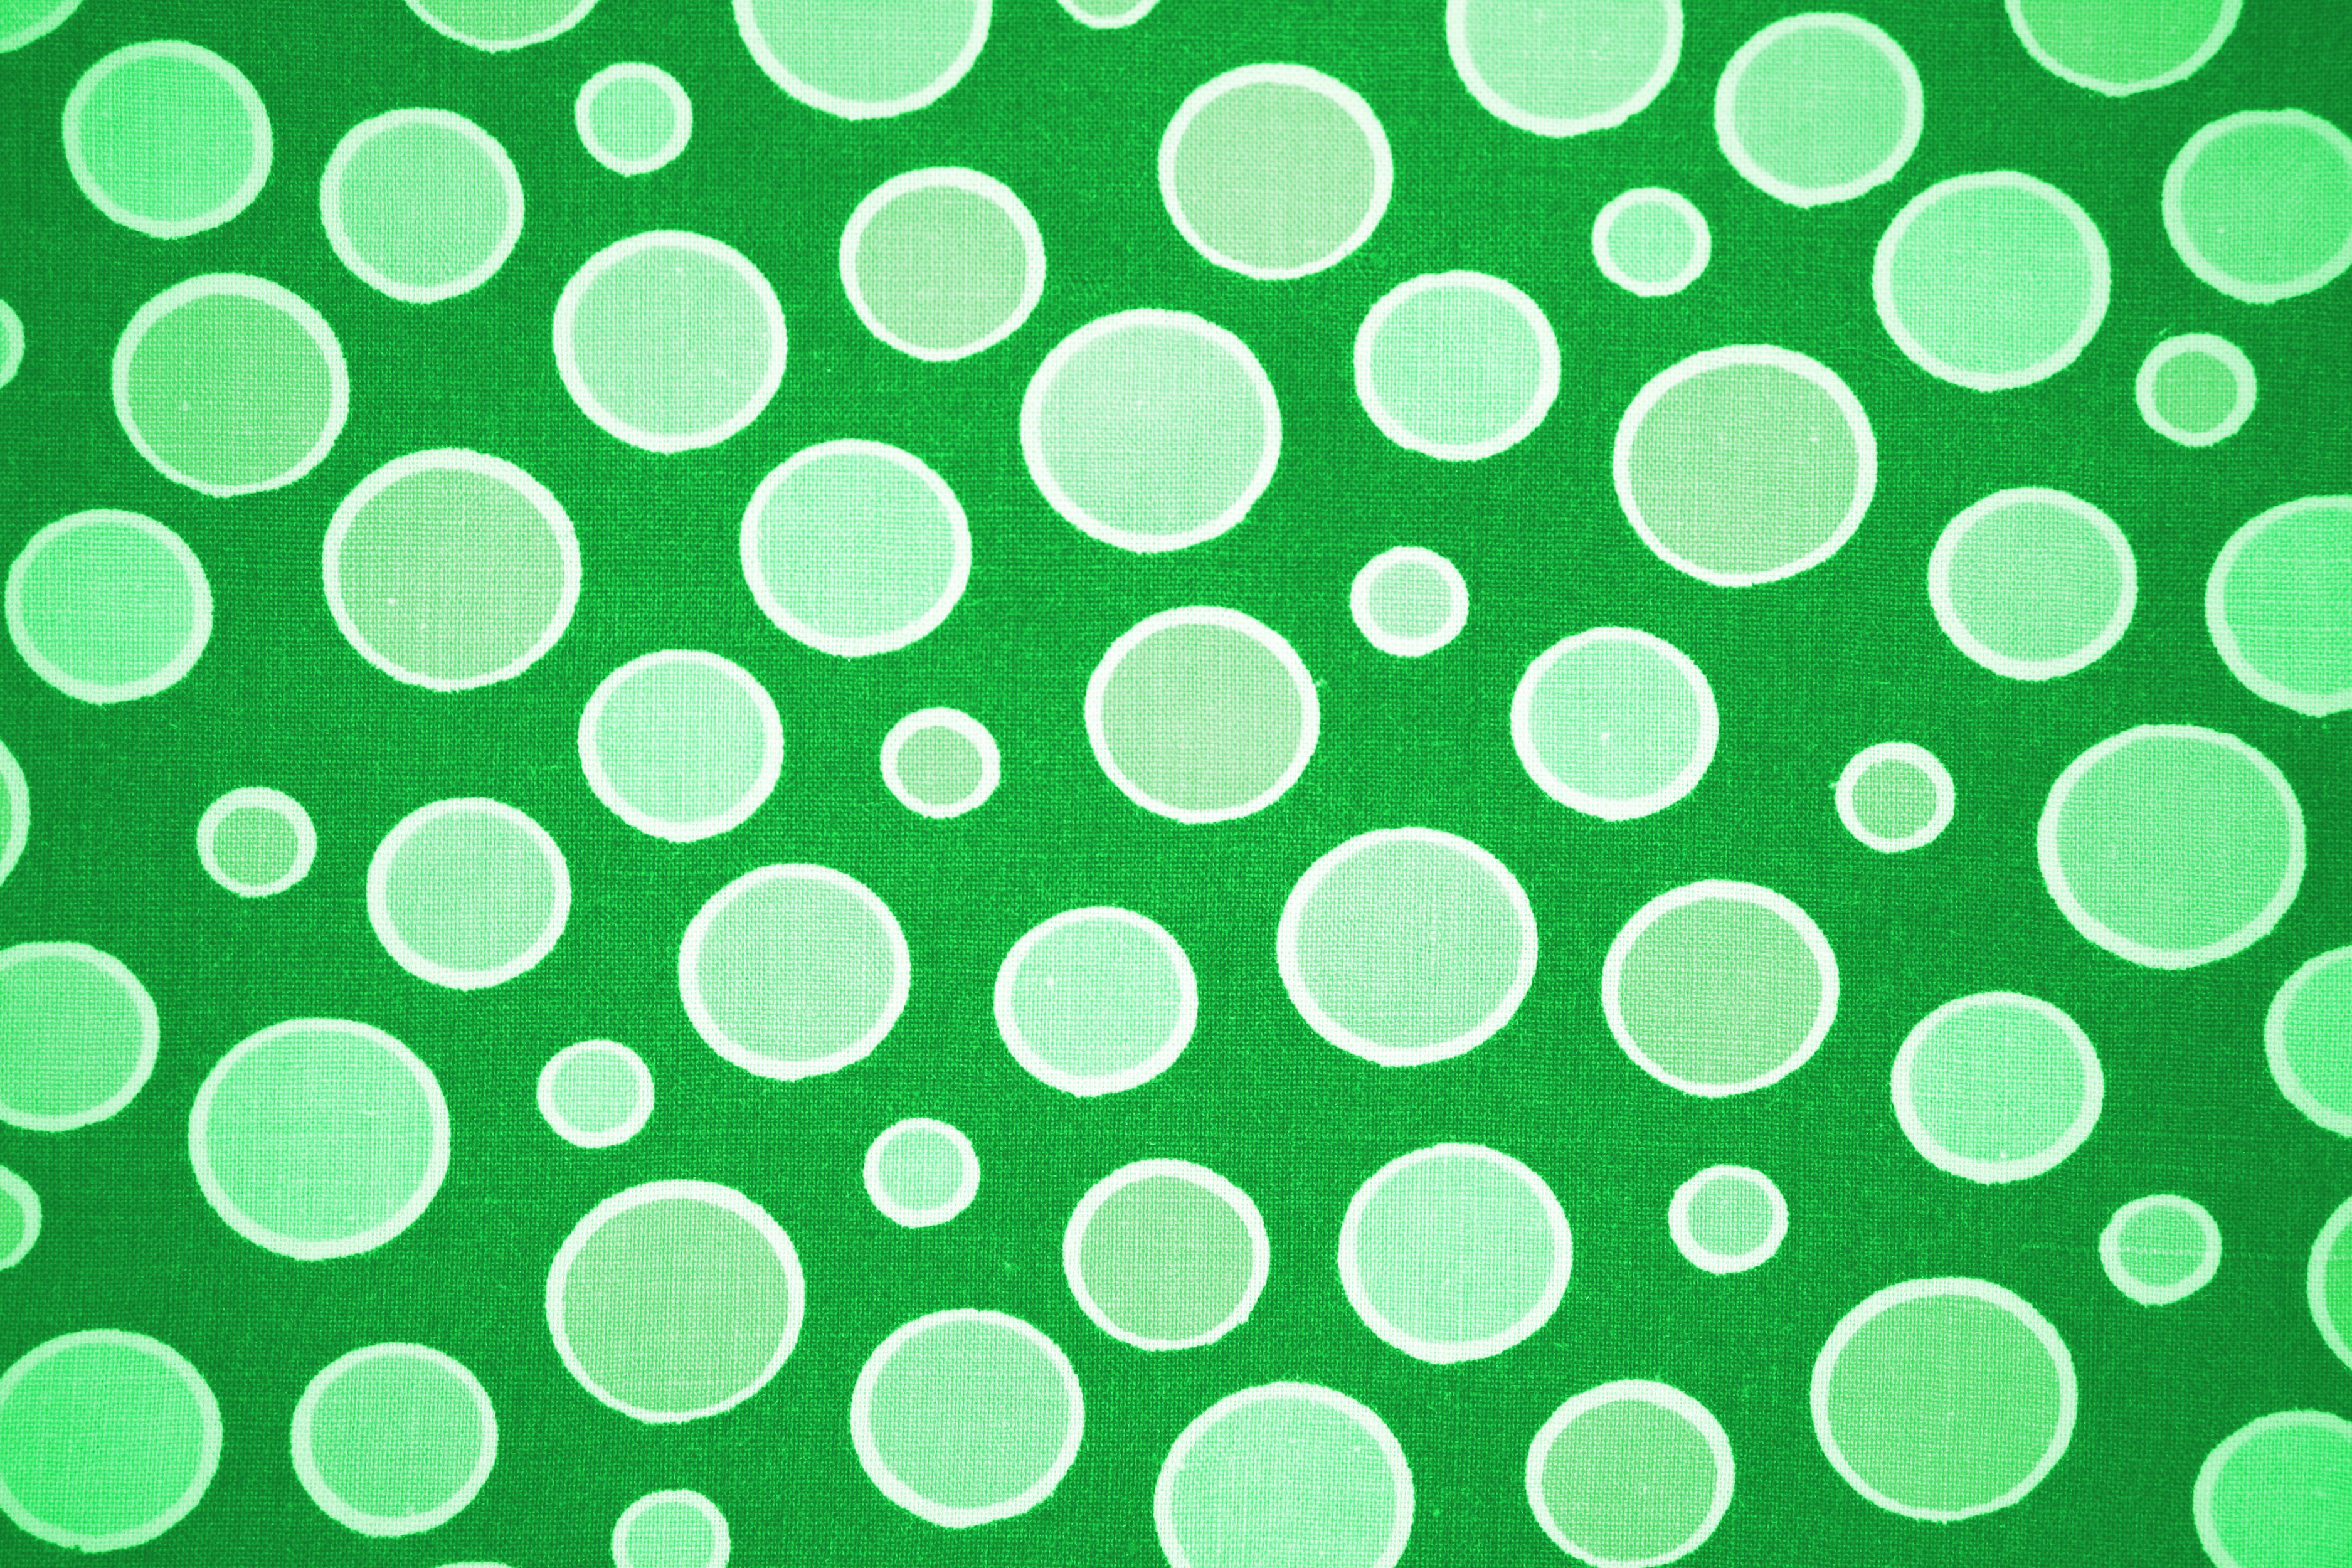 Green Fabric with Dots Texture Picture | Free Photograph | Photos ...